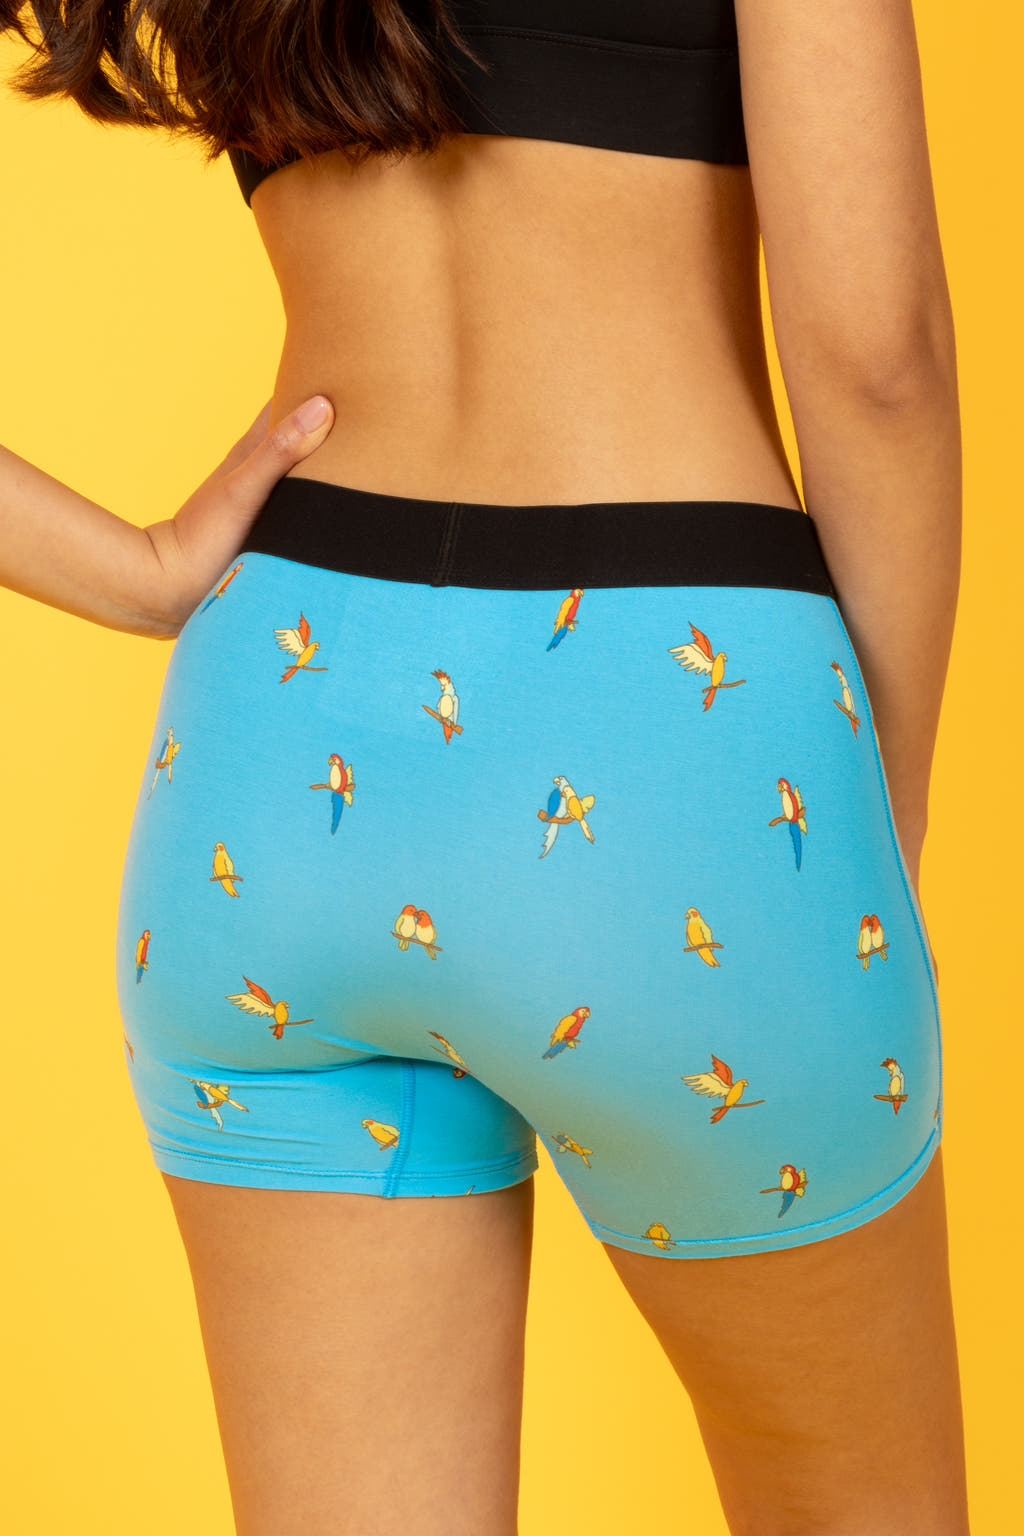 A person in The Tweet Yourself | Parrot Women’s Boxers, featuring birds, pondering bird sounds. From Shinesty's quirky collection.